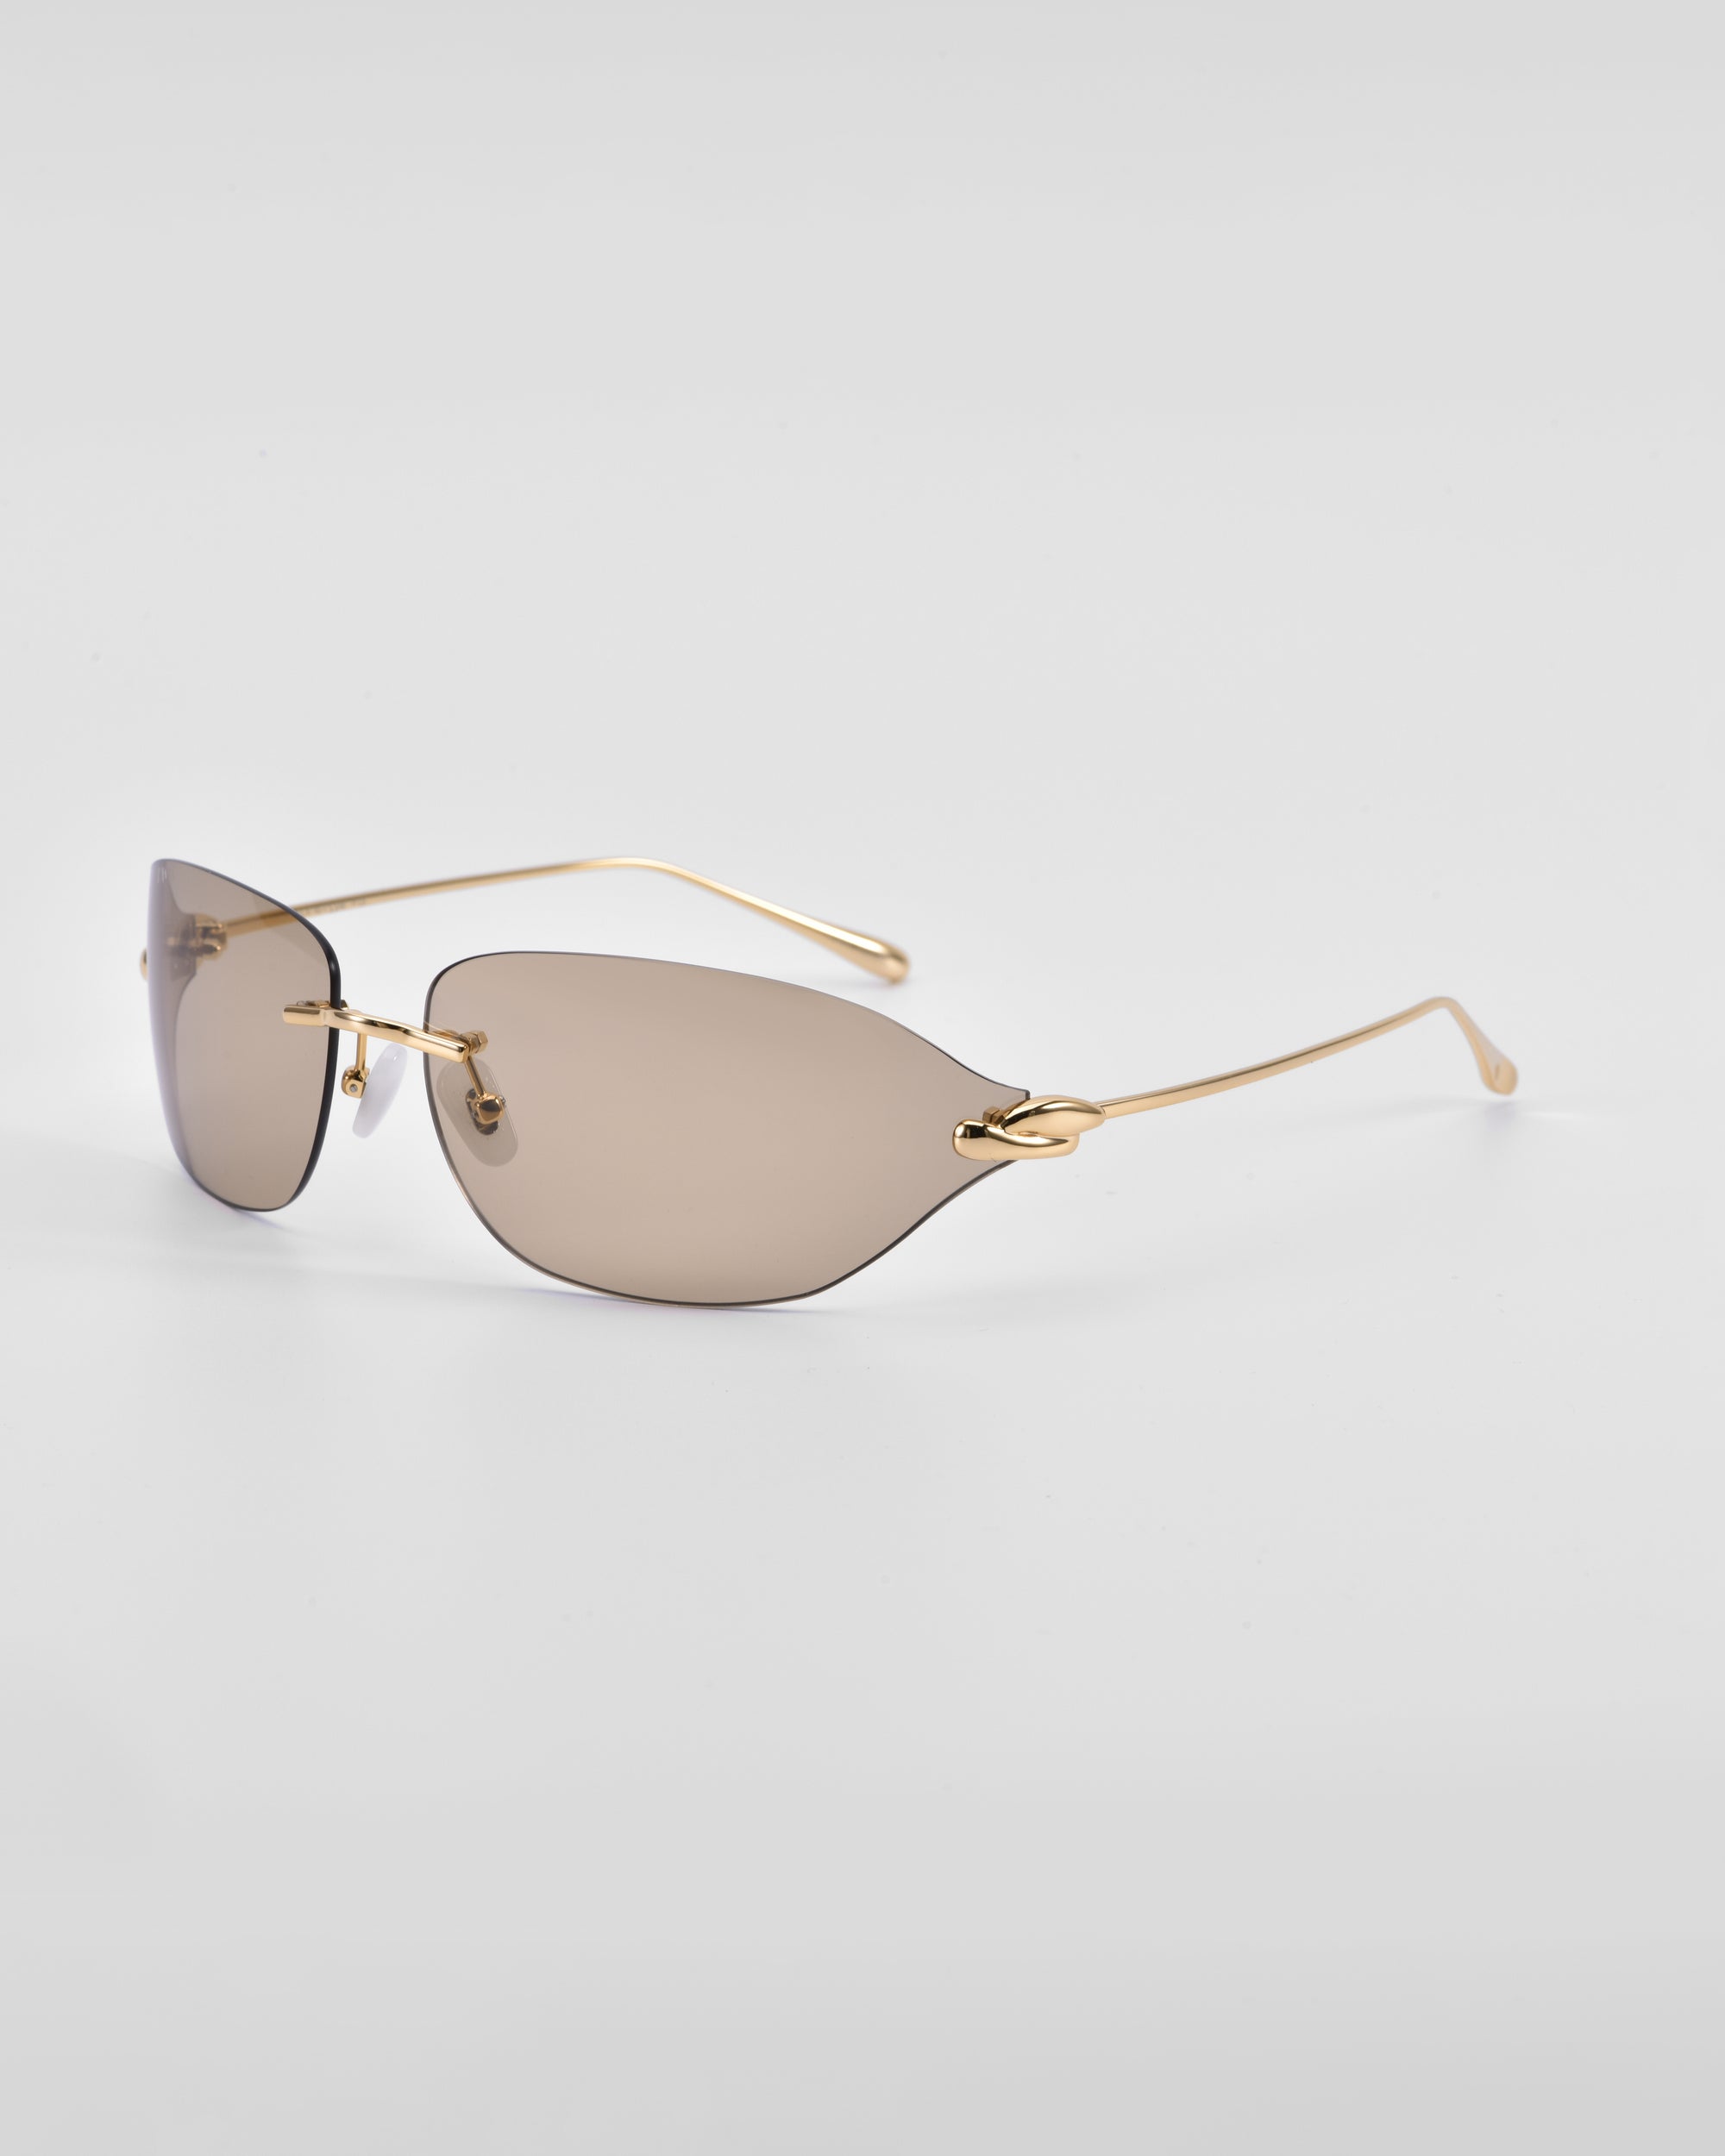 A pair of Serpent I sunglasses by For Art&#39;s Sake® with light brown-tinted frameless wrap lenses and thin, gold-colored wire temples. The sleek and minimalist design gives them a modern and sophisticated look, enhanced by the luxurious 18-karat gold plating on the temples, set against a plain white background.